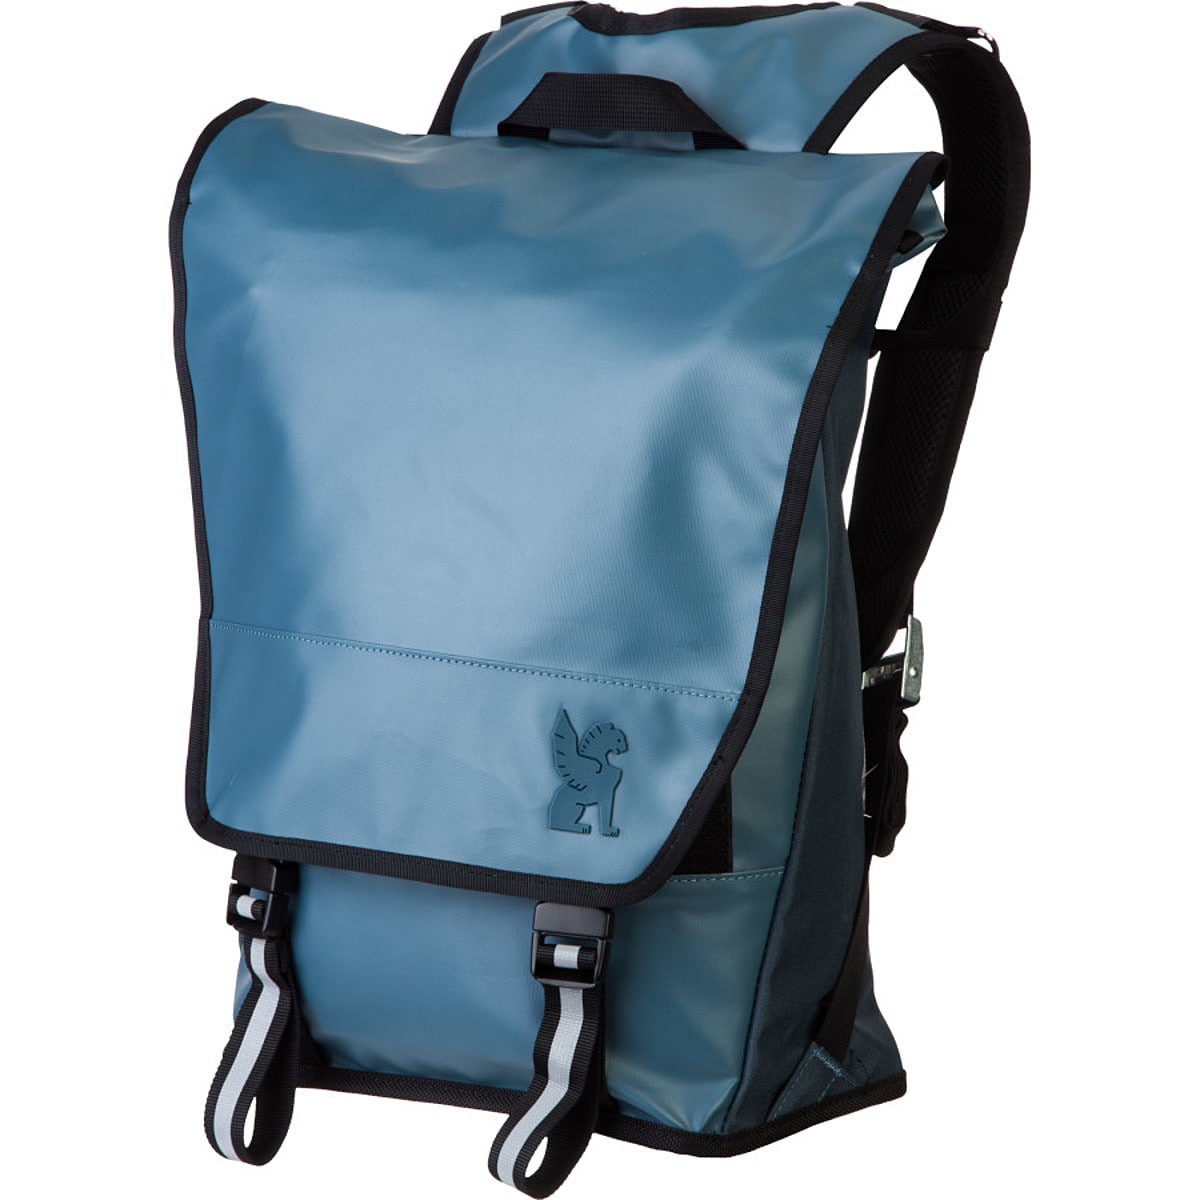 Chrome Delta Backpack - Accessories